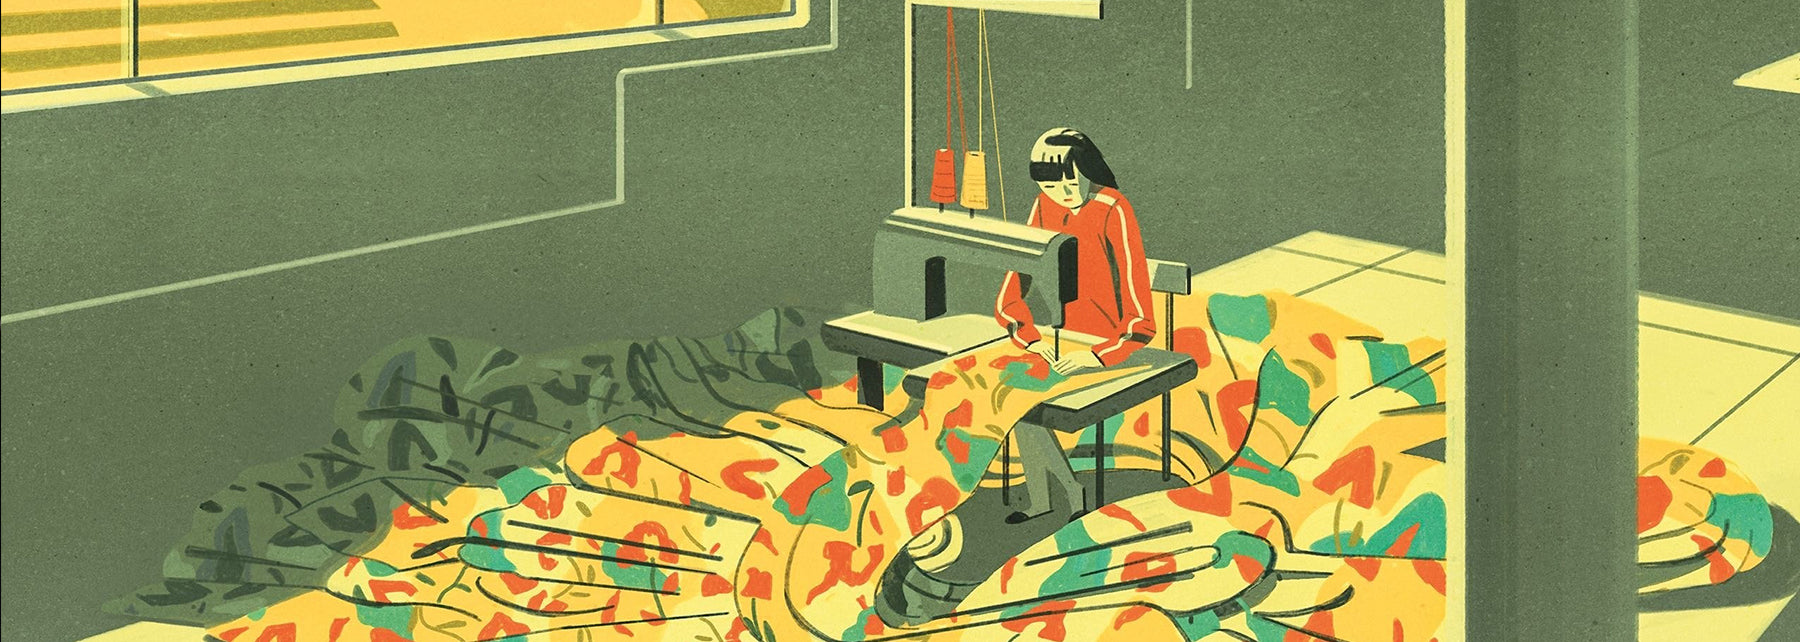 THE NEED FOR TRANSPARENCY THE NEW YORKER - The Chinese Workers Who – Crafted Society